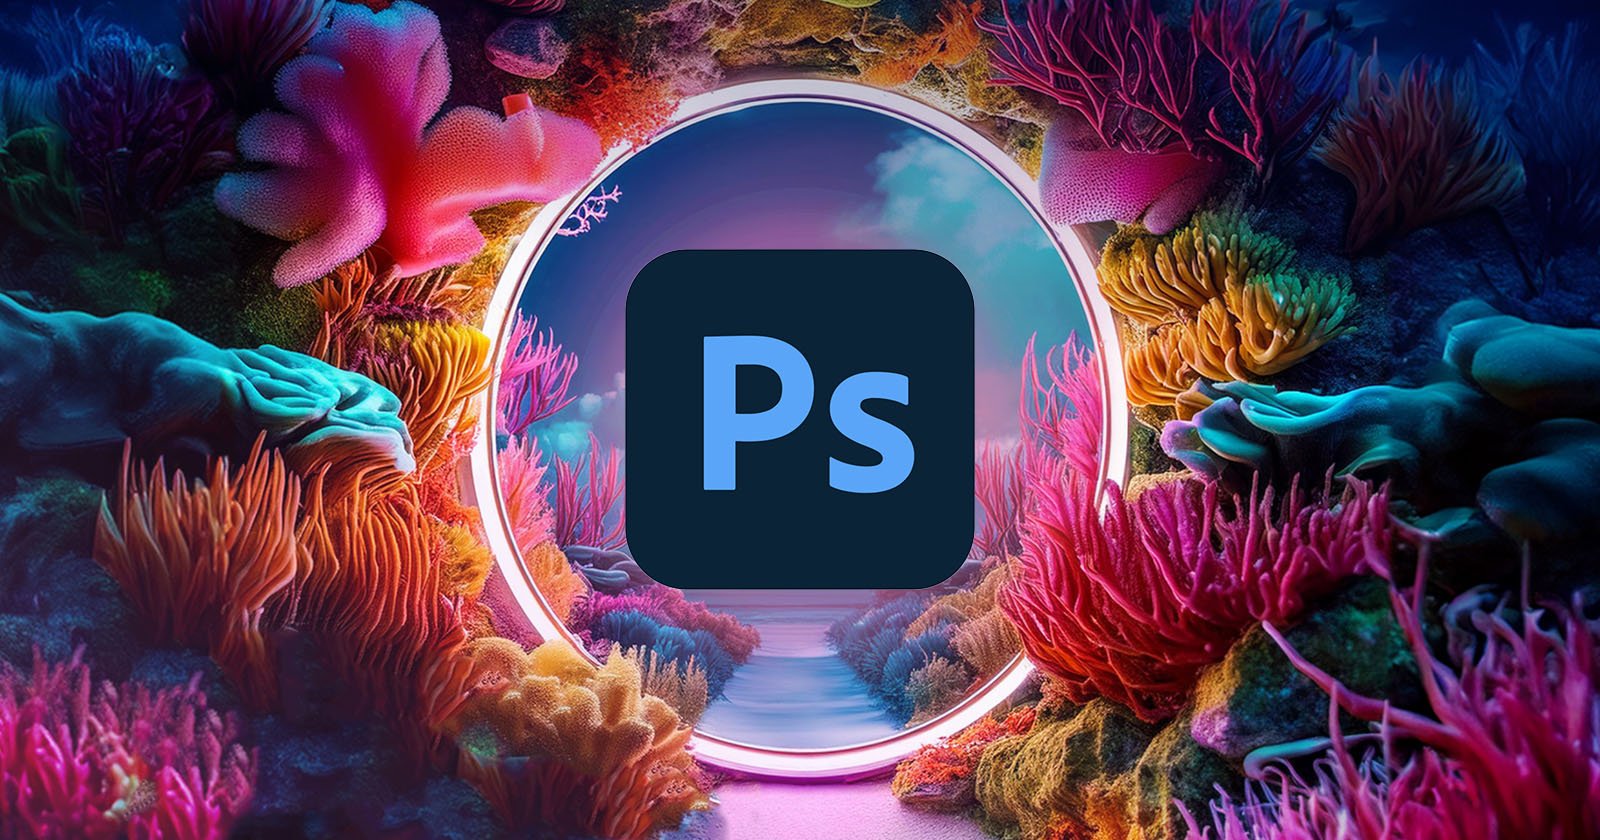 A vibrant digital artwork featuring a portal framed by colorful, lush coral reefs, leading to the adobe photoshop (ps) logo centered against a starry sky.